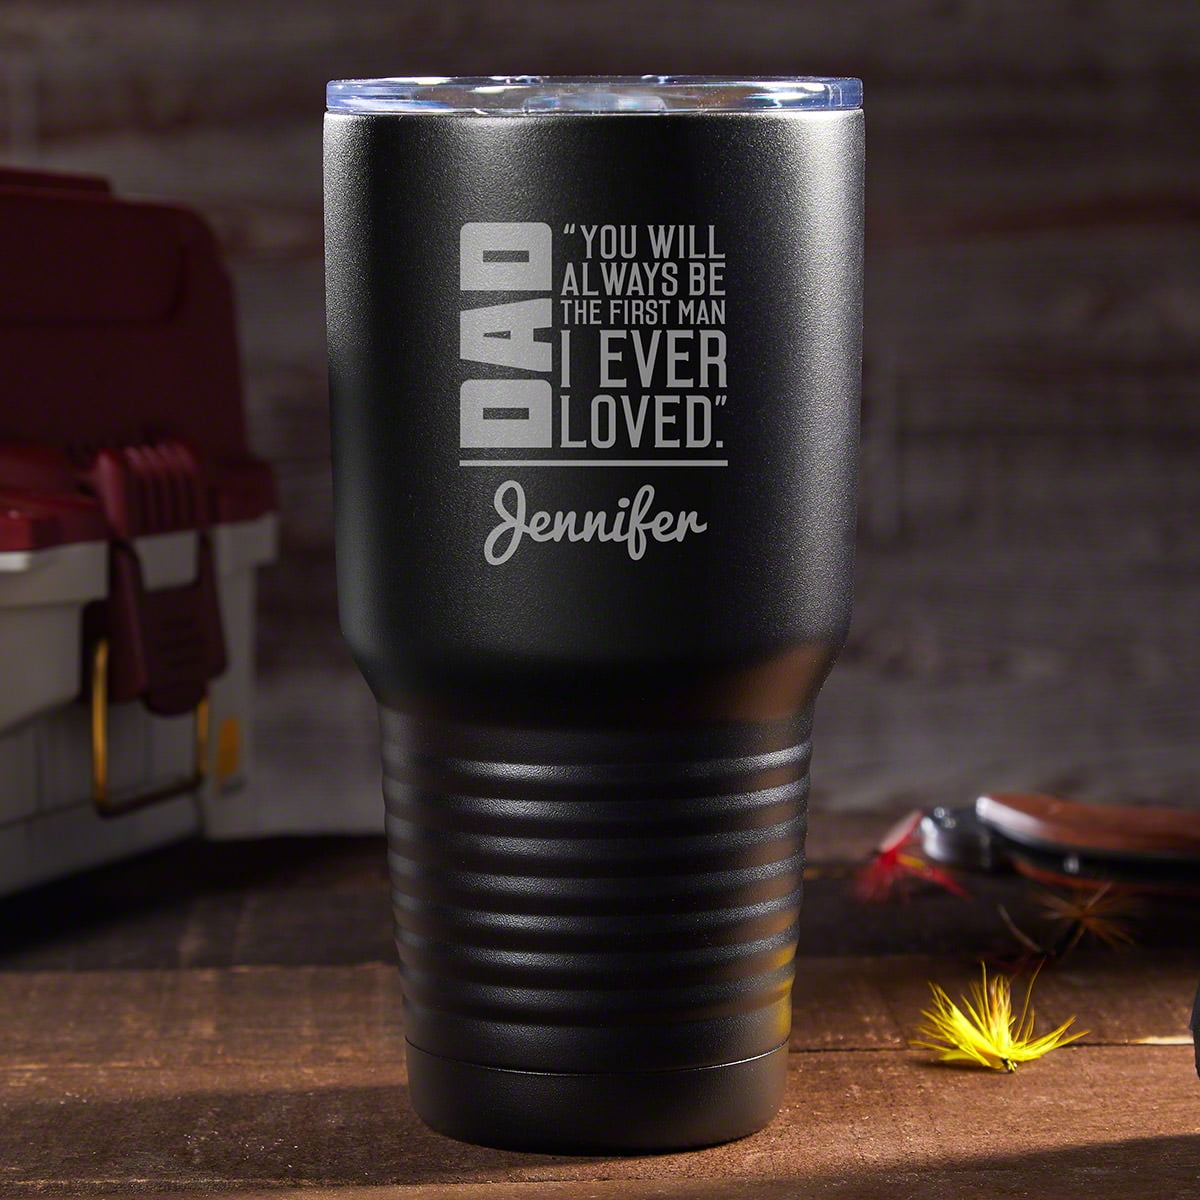 4. Promoting Sustainable Practices Through the Use of Personalized Insulated Tumblers